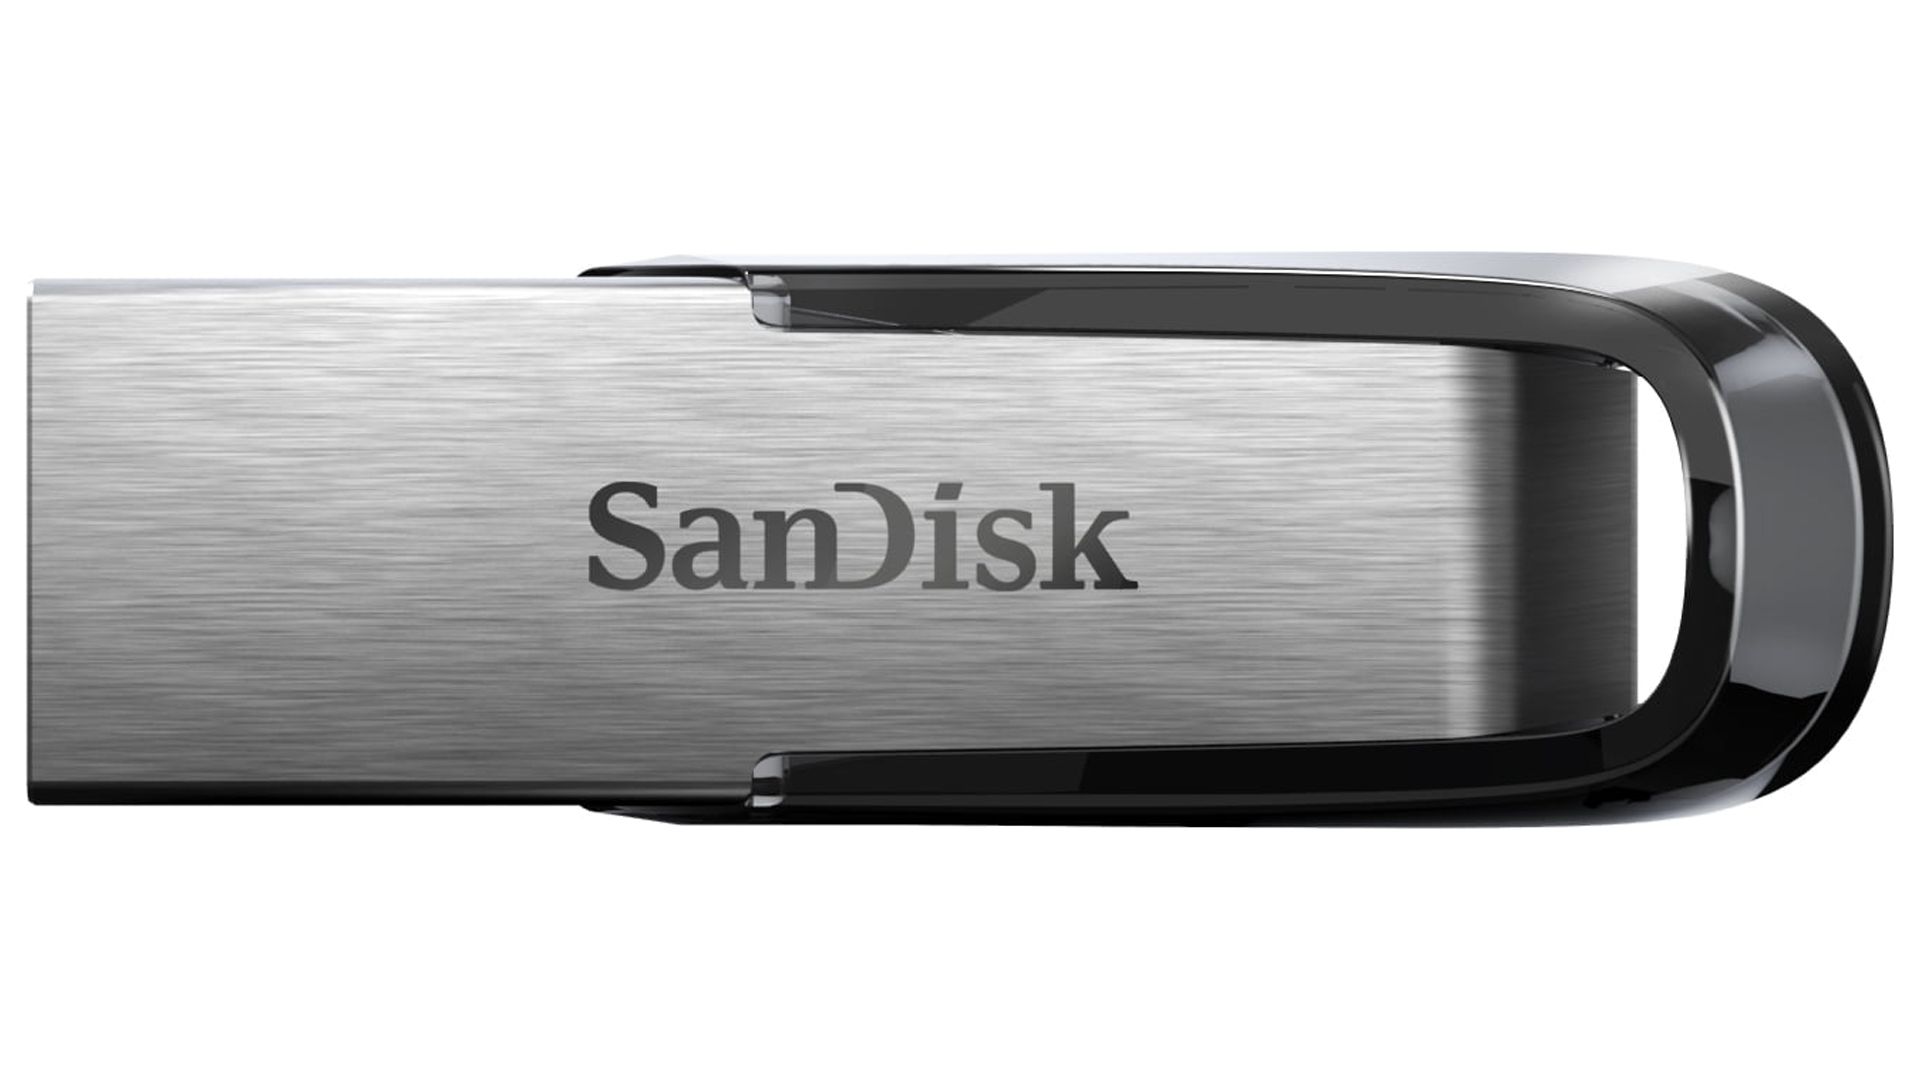 SanDisk 128GB Ultra Flair USB 3.0 Flash Drive - SDCZ73-128G-AW46 - image 1 of 10